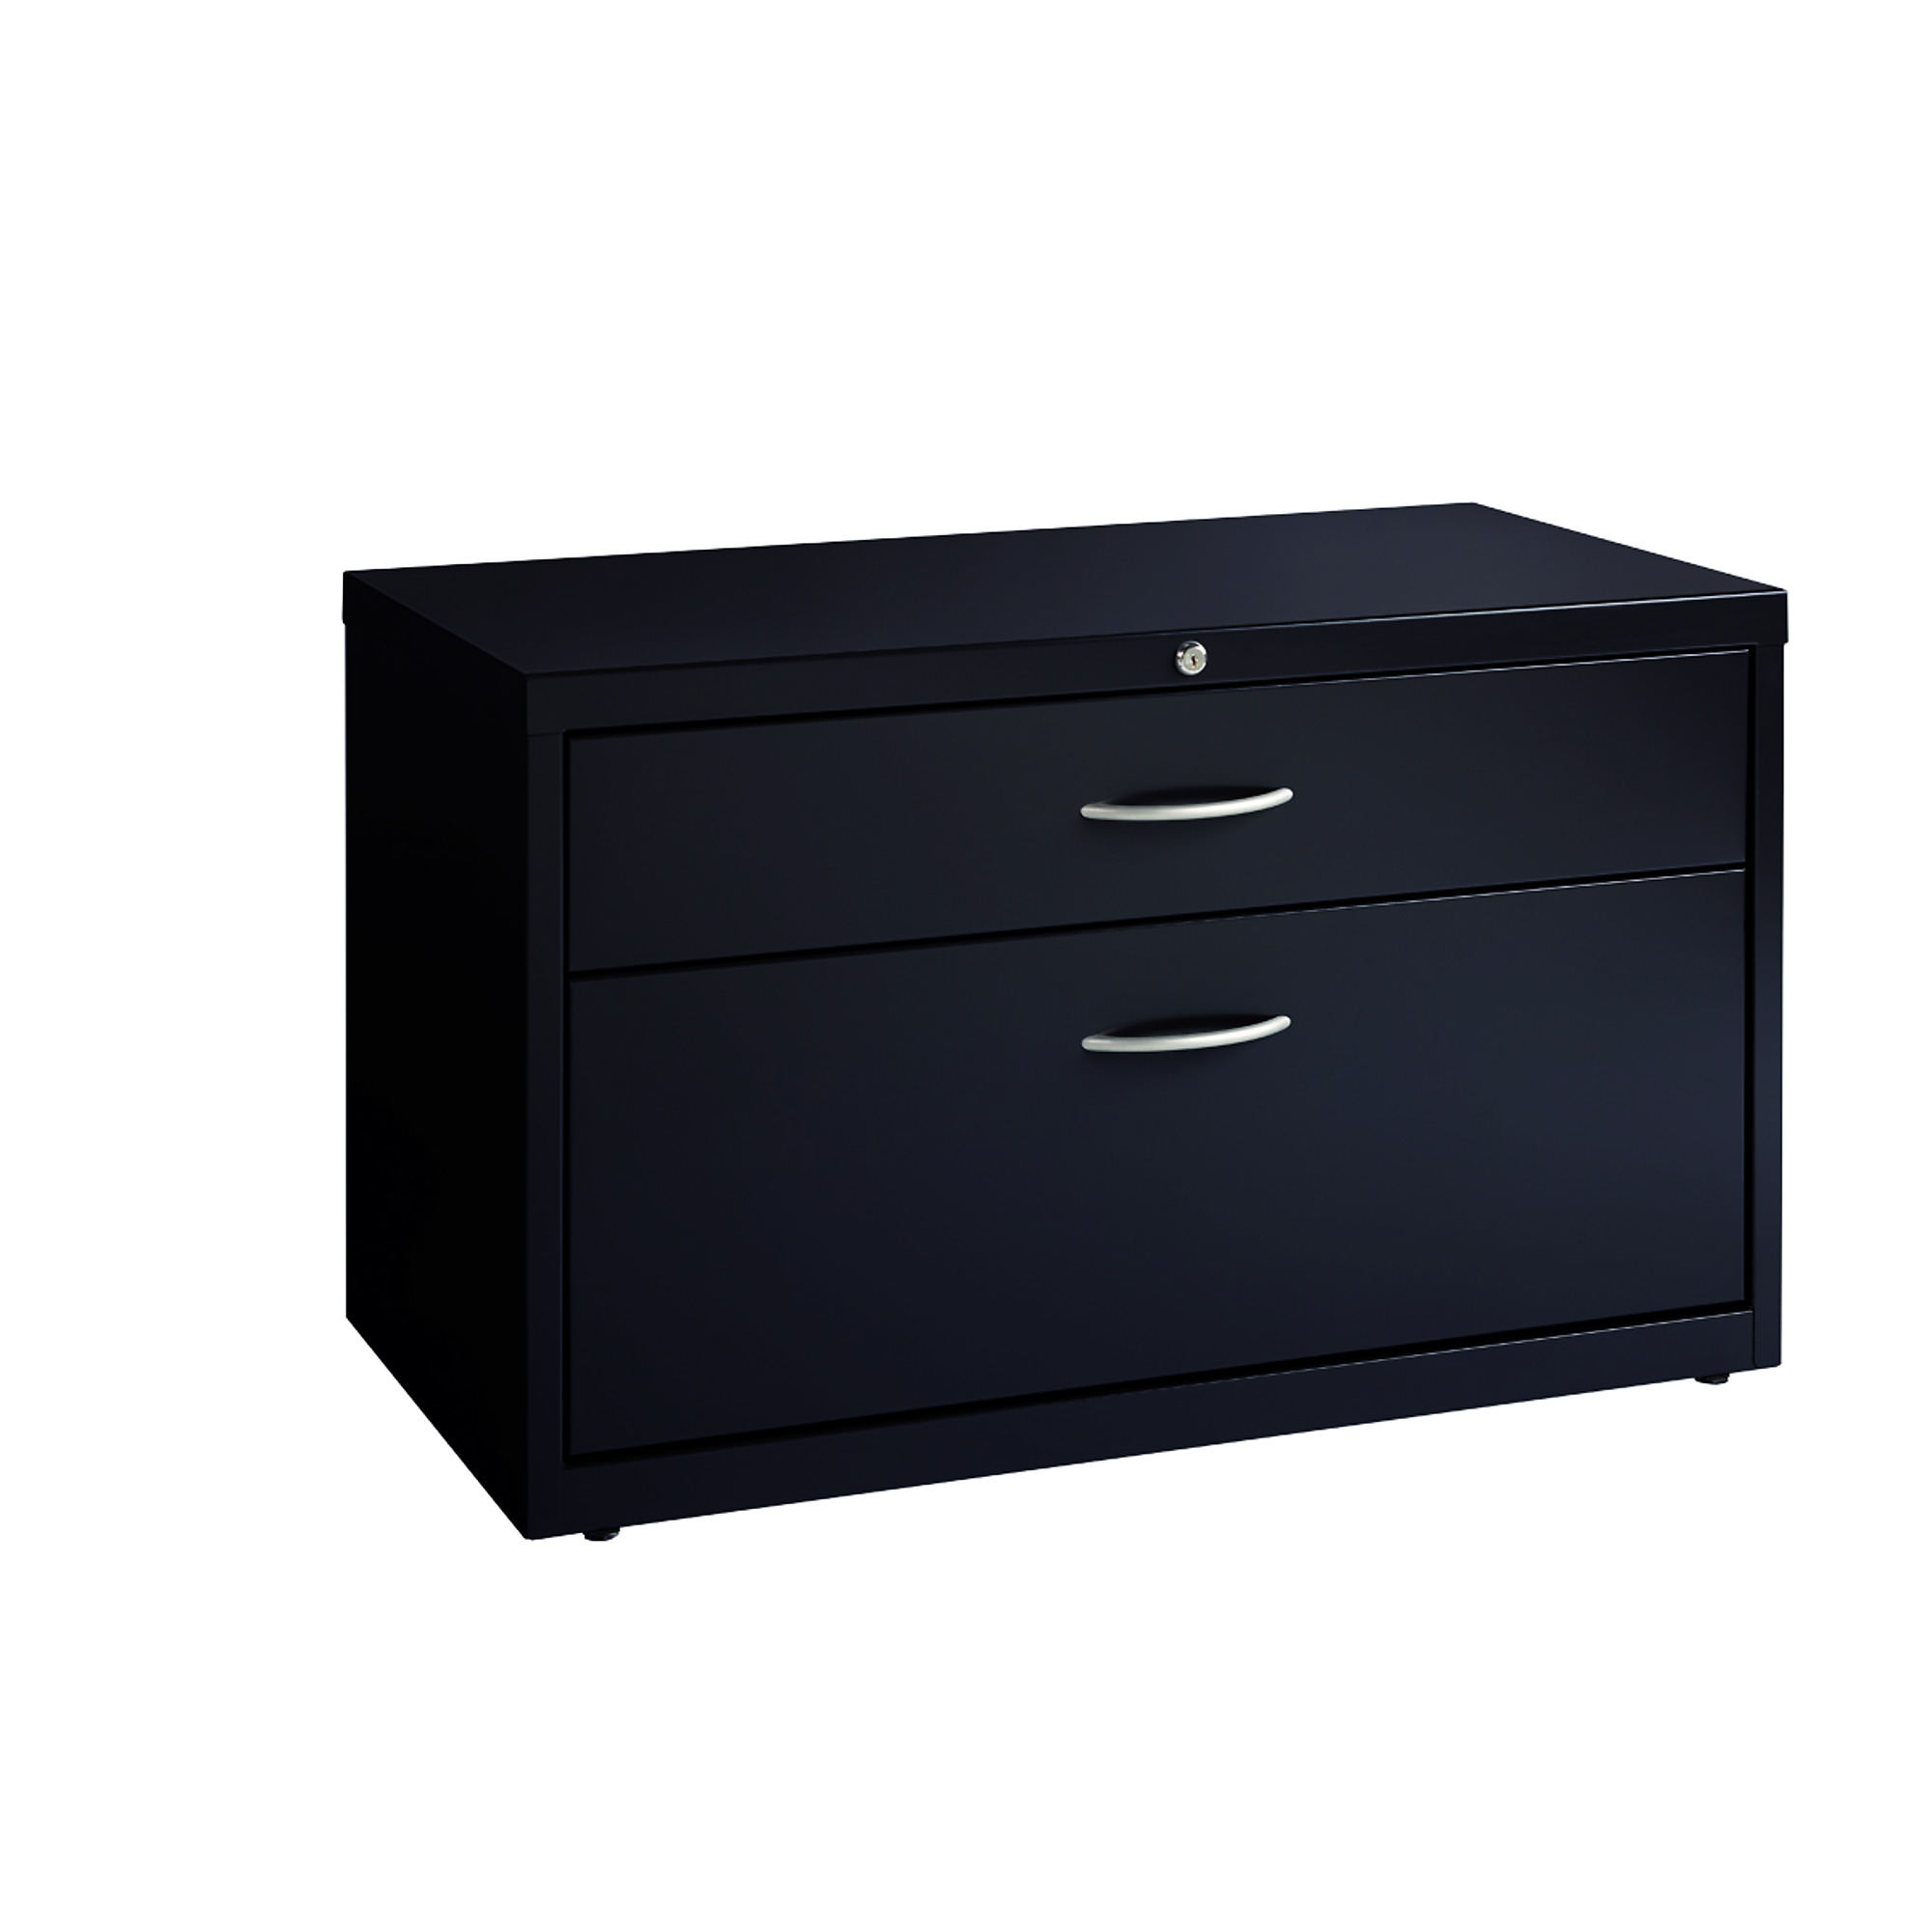 2 Drawer Credenza Lateral File Cabinet, Width 36 in, Depth 18.625 in, Height 22 in, Model - Hirsh Industries 20504